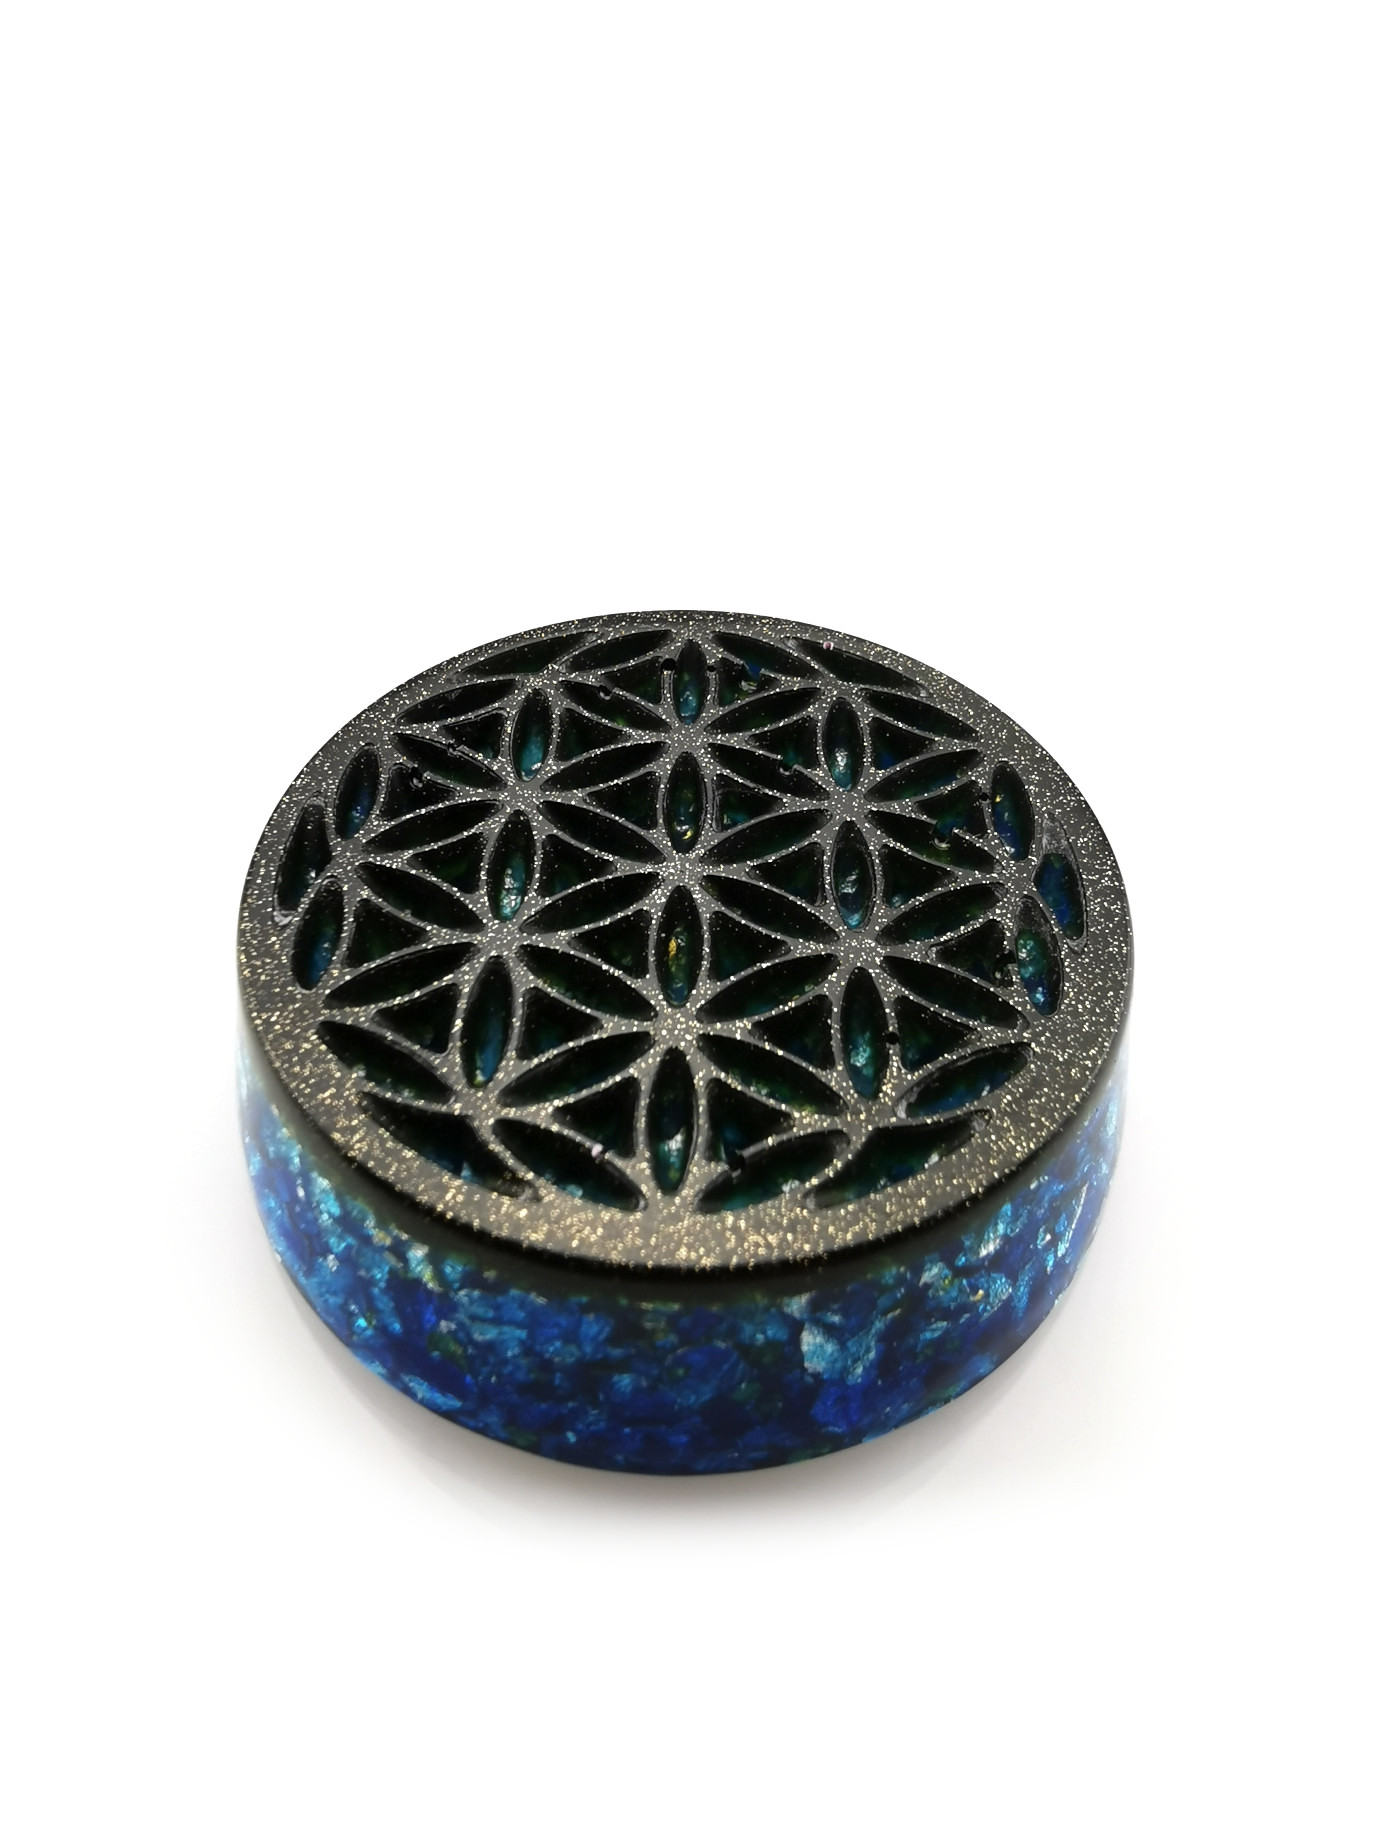 Jet Black and Blue Flower of Life Orgone Healing Puck by OrgoneVibes